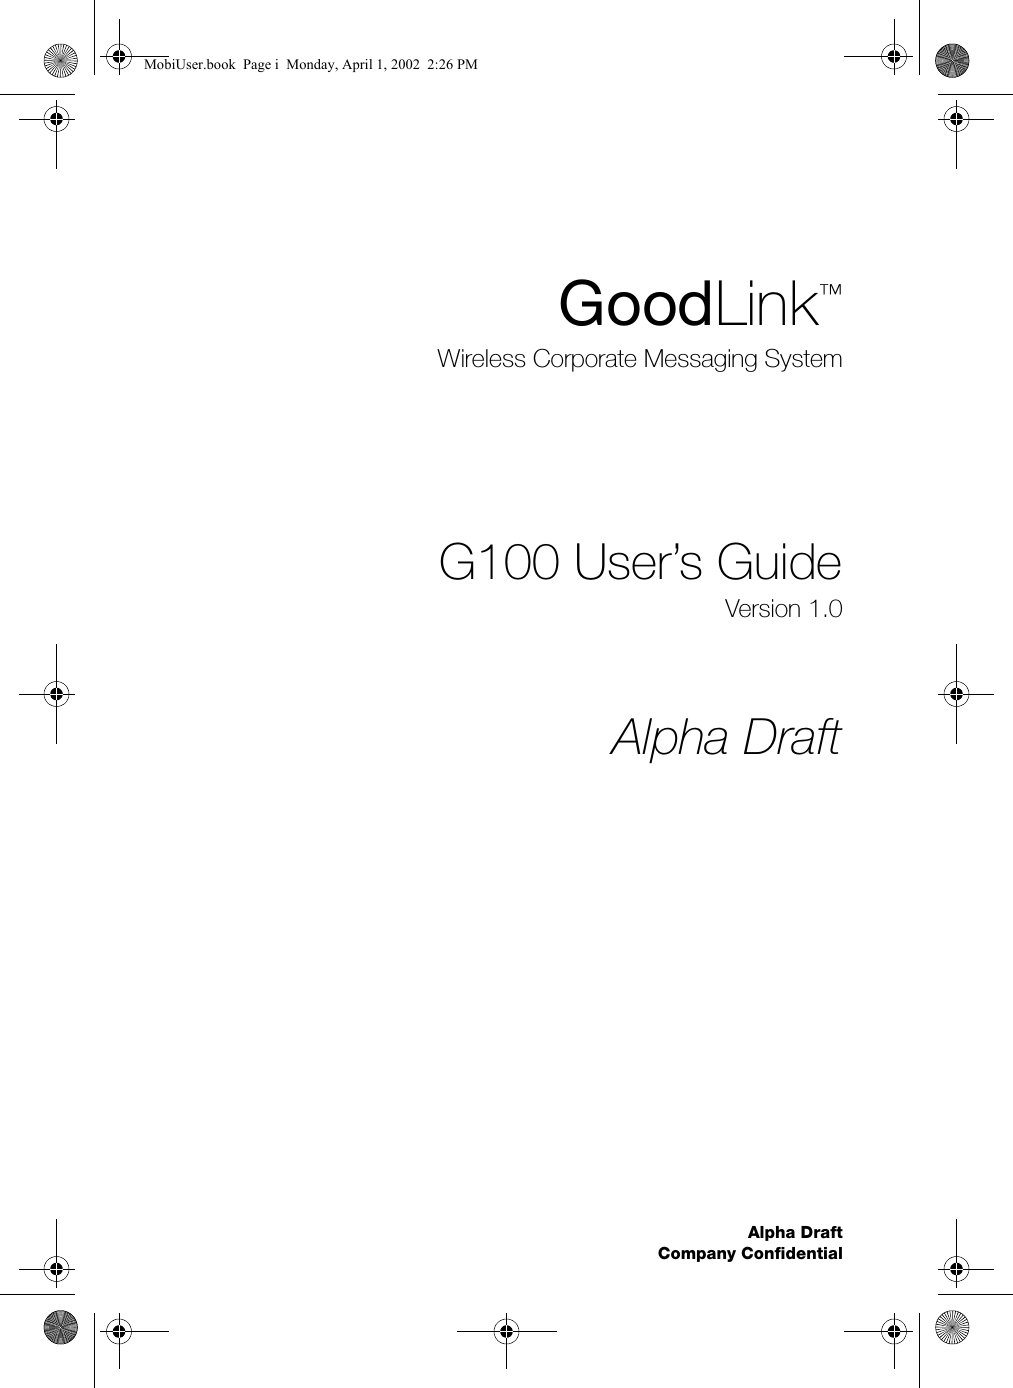 Alpha DraftCompany ConfidentialGoodLink™Wireless Corporate Messaging SystemG100 User’s GuideVersion 1.0Alpha DraftMobiUser.book  Page i  Monday, April 1, 2002  2:26 PM